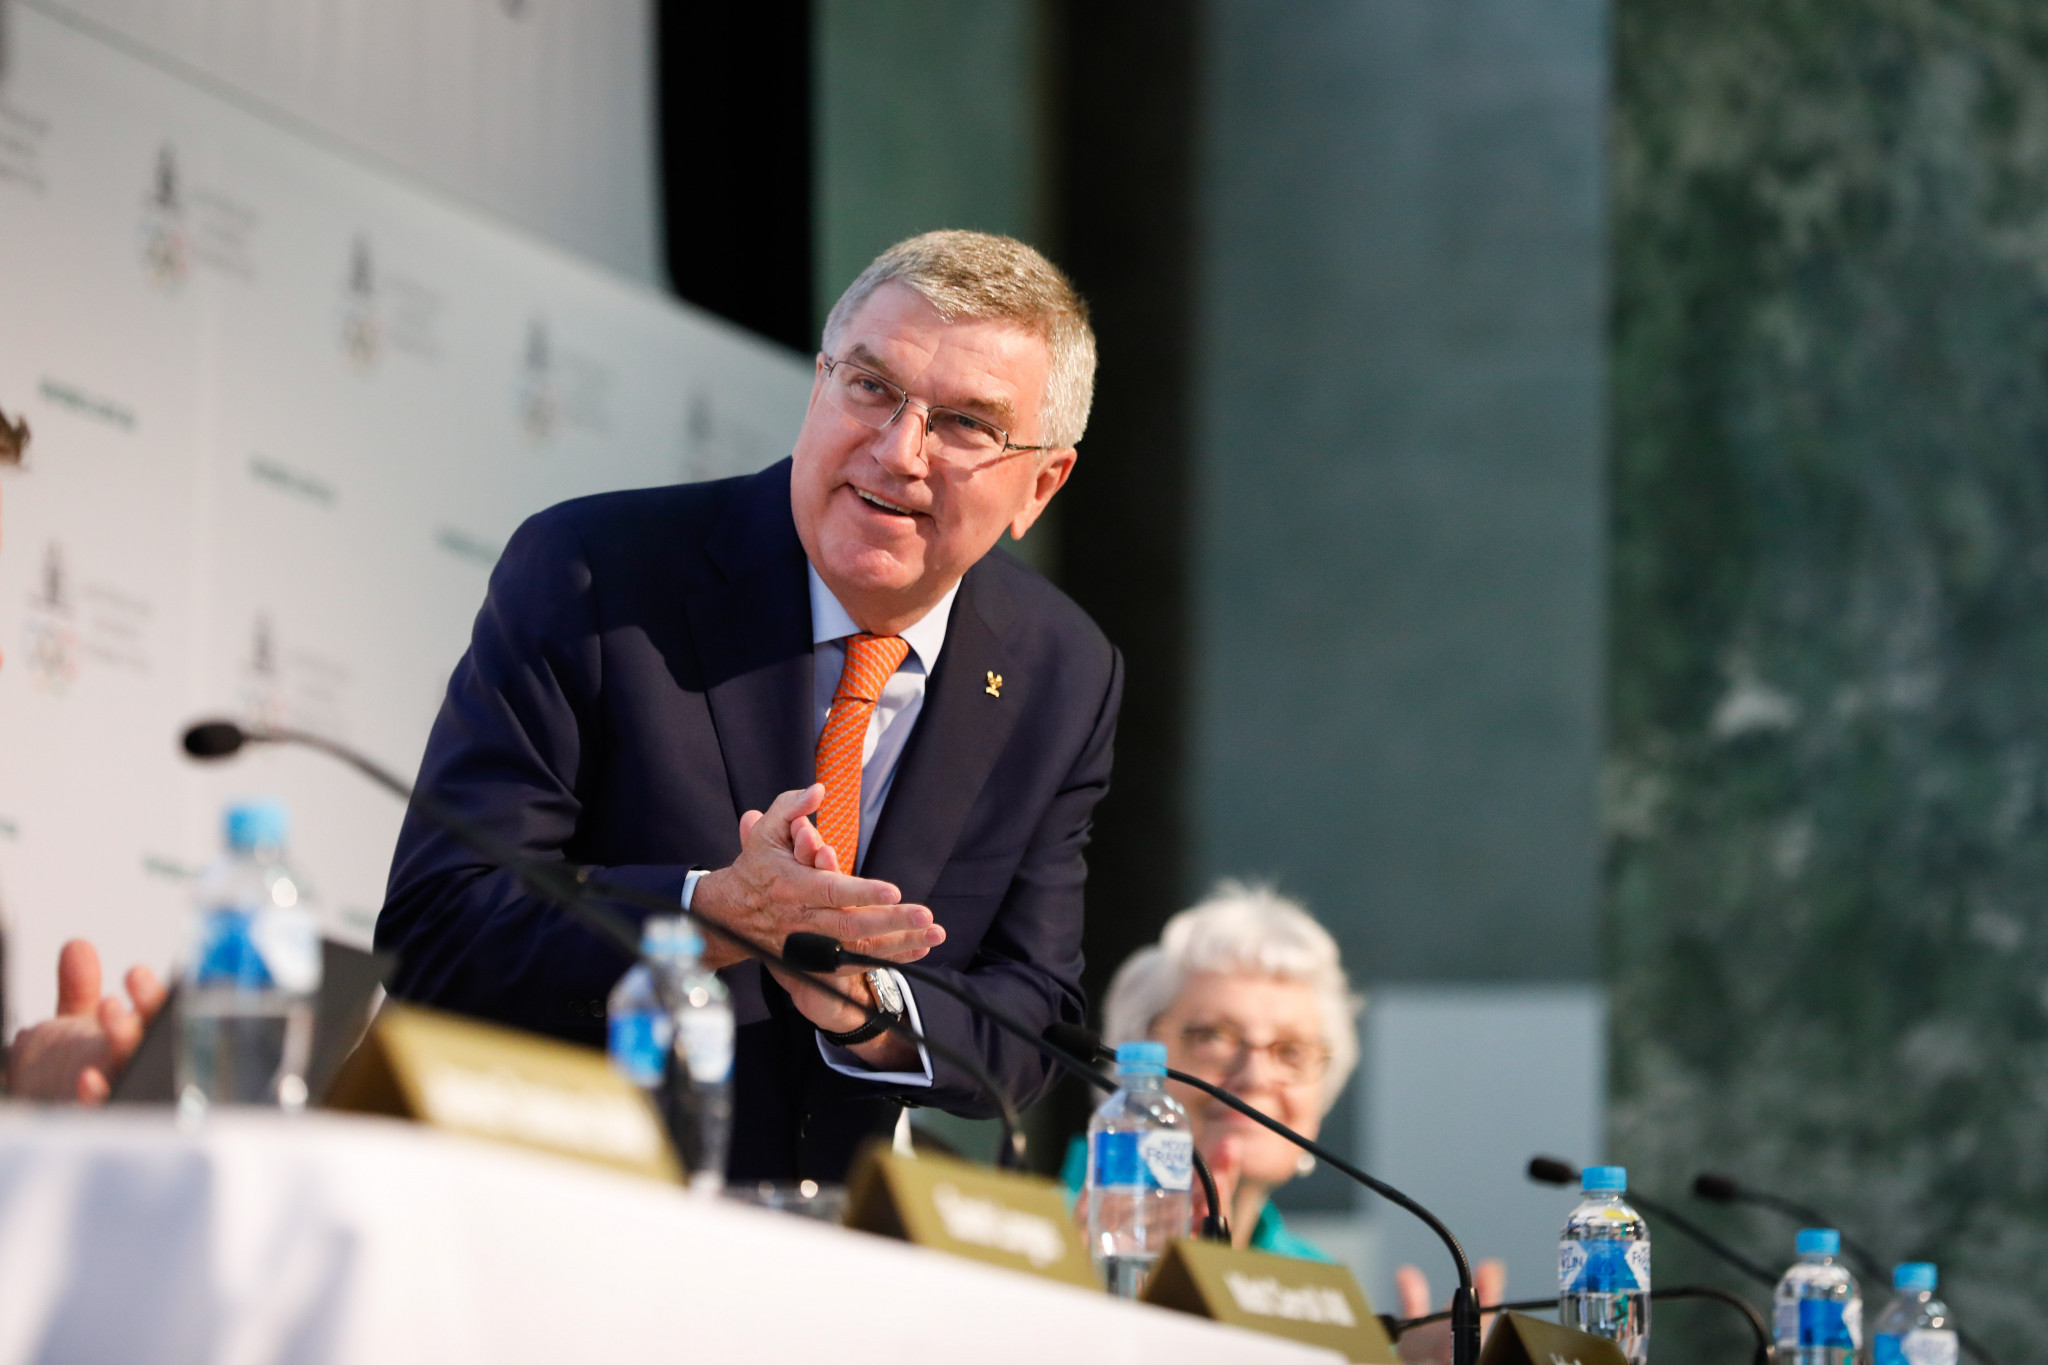 IOC President Thomas Bach President Thomas Bach has claimed organising a boxing event is "not rocket science" ©Getty Images